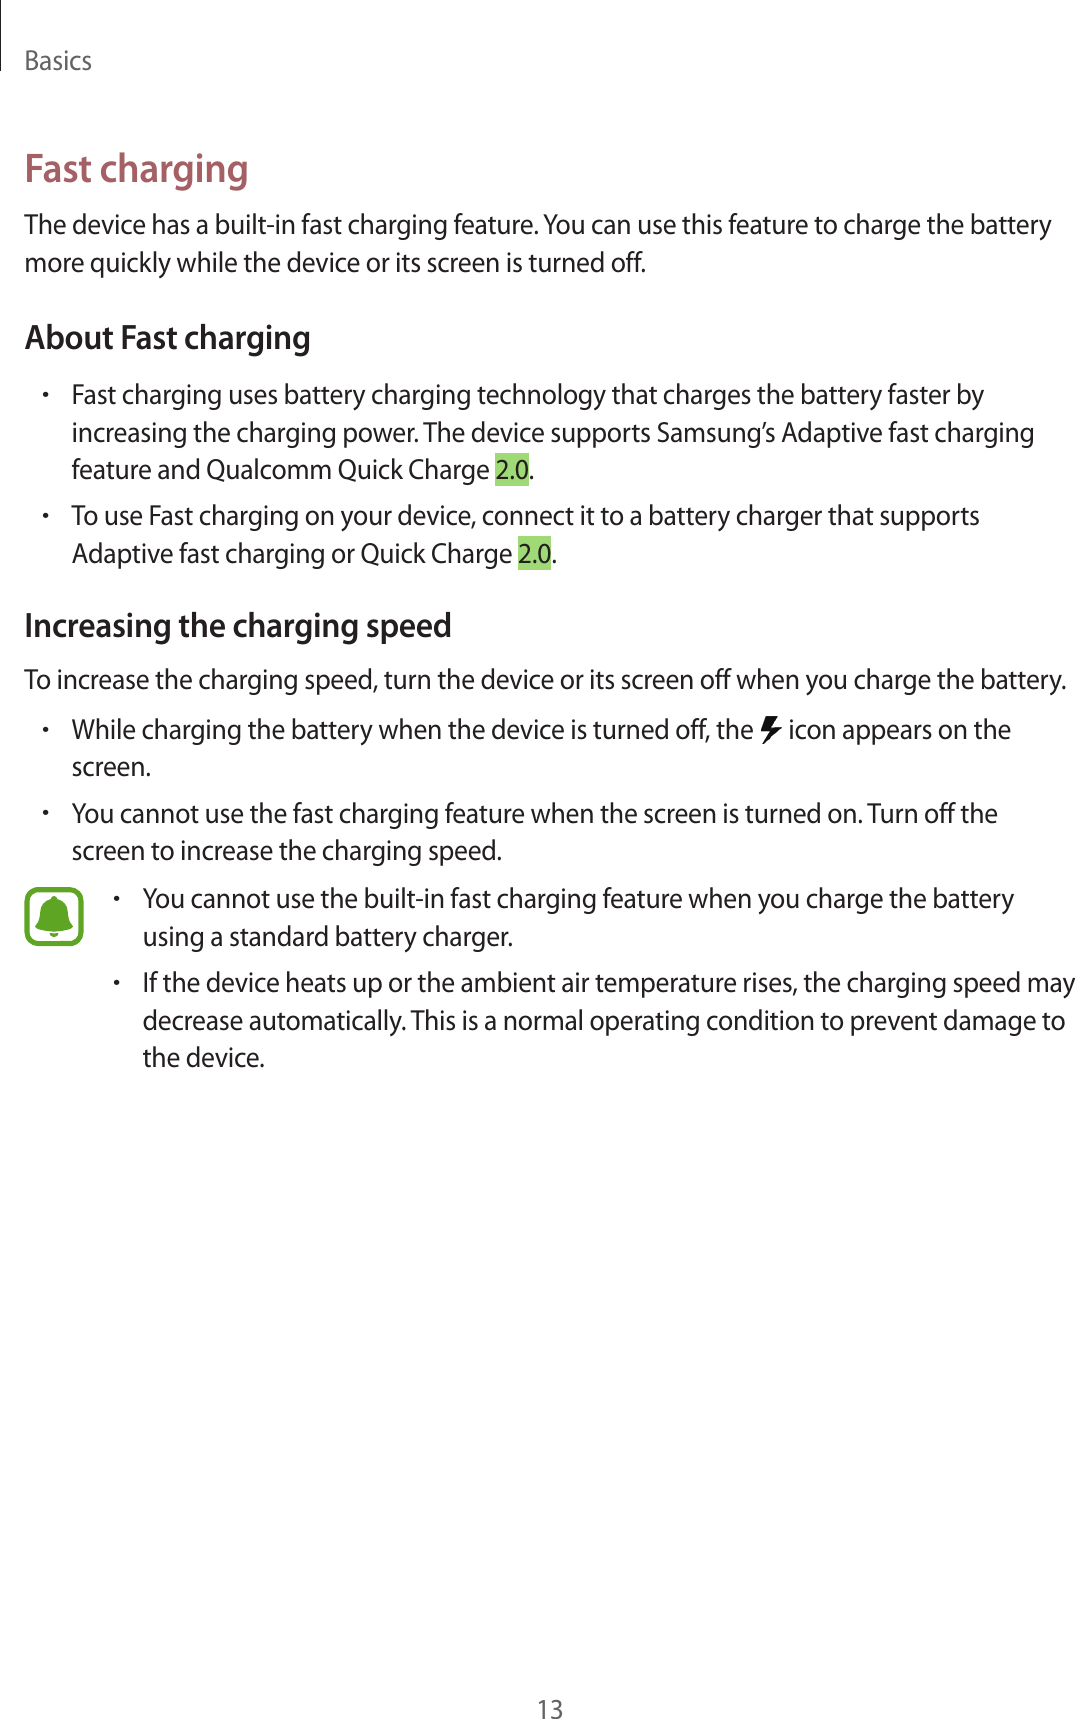 Basics13Fast chargingThe device has a built -in fast charg ing f ea tur e . You can use this featur e to char ge the batt ery more quickly while the device or its screen is turned off.About Fast charging•Fast charg ing uses batt ery charging technology that charges the ba ttery faster by increasing the char ging po w er. The device supports Samsung ’s Adaptiv e fast char ging featur e and Qualc omm Quick Charge 2.0.•To use Fast charg ing on y our device, connect it to a batt ery charger that supports Adaptiv e fast char ging or Quick Char ge 2.0.Increasing the charg ing speedTo increase the char ging speed , turn the device or its scr een off when y ou char ge the ba ttery.•While charg ing the batt ery when the device is turned off , the   icon appears on the screen.•You cannot use the fast charging featur e when the screen is turned on.  Turn off the screen to incr ease the char g ing speed .•You cannot use the built-in fast charging f eatur e when y ou char ge the batt ery using a standard batt ery charger.•If the device heats up or the ambient air tempera tur e rises, the char g ing speed ma y decrease automa tically. T his is a normal operating c ondition to pr ev en t damage to the device .